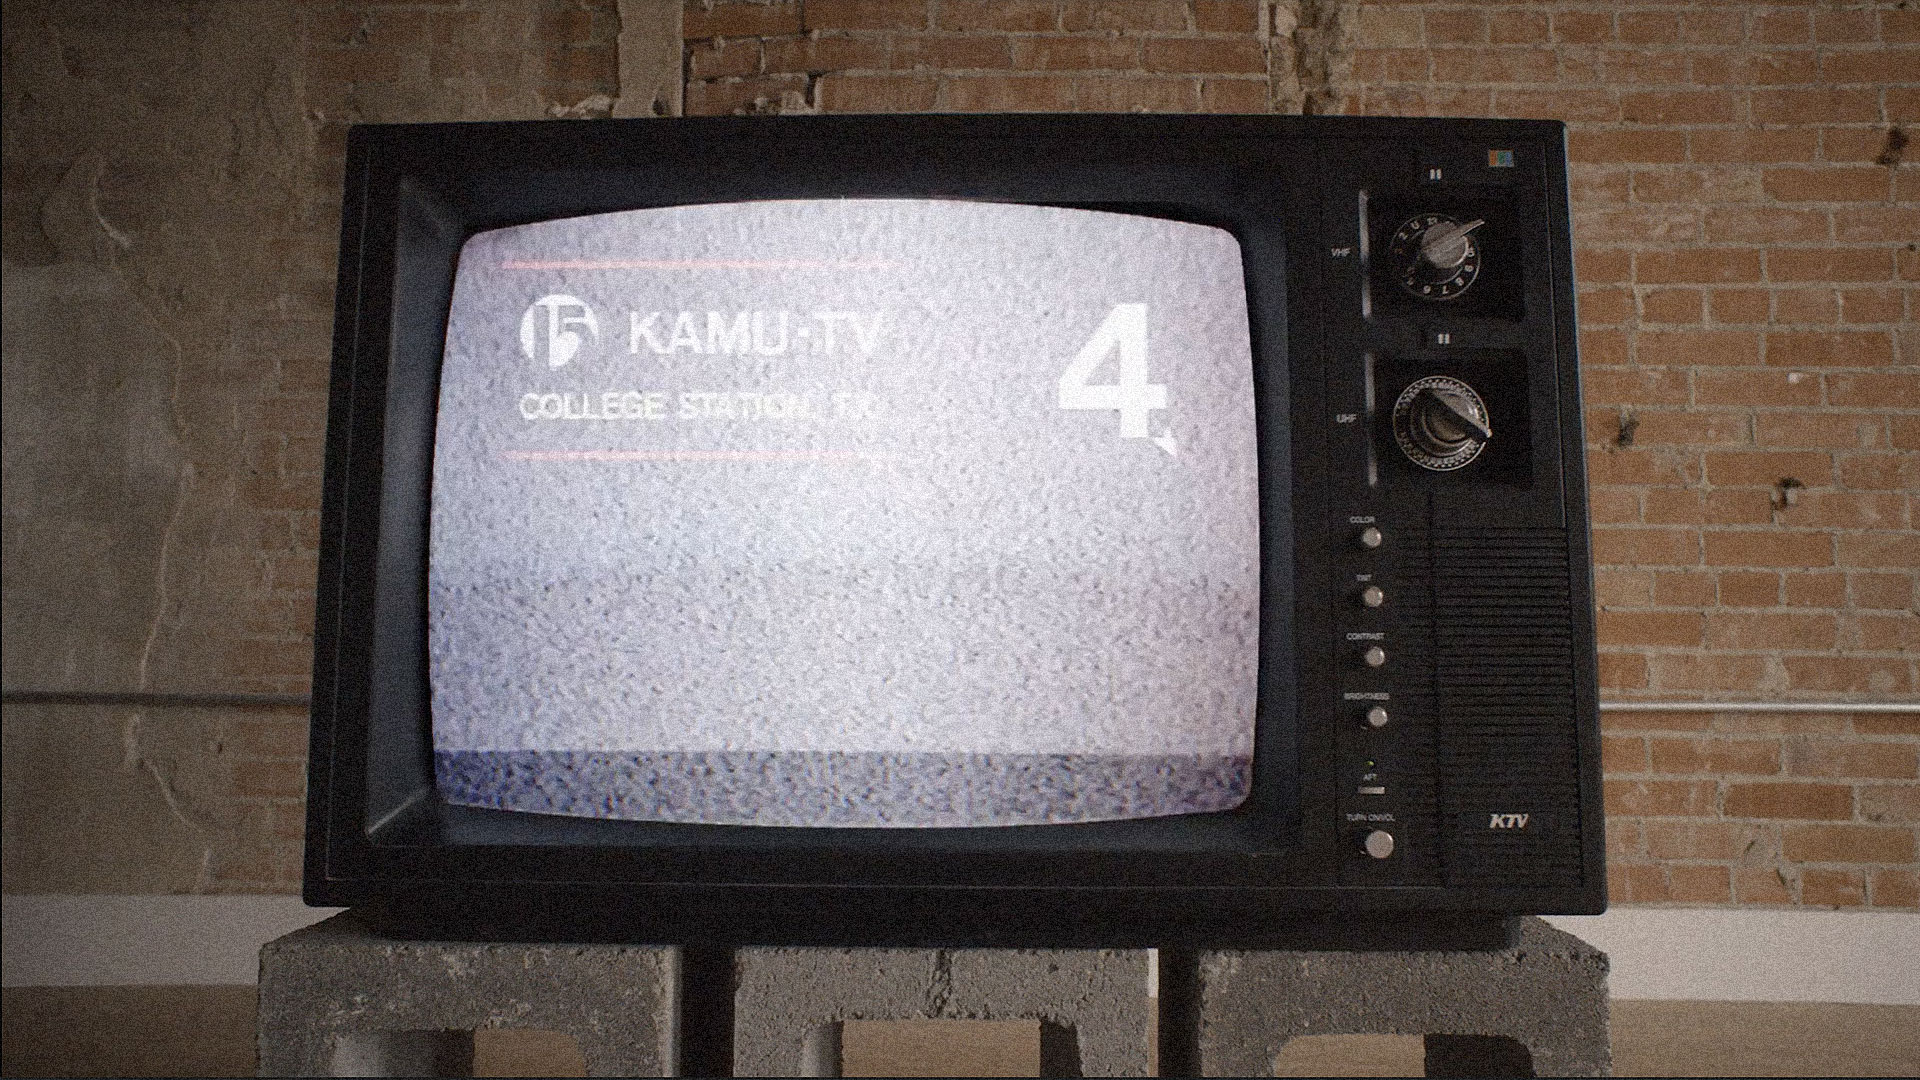 an old TV showing the KAMU-TV channel 4